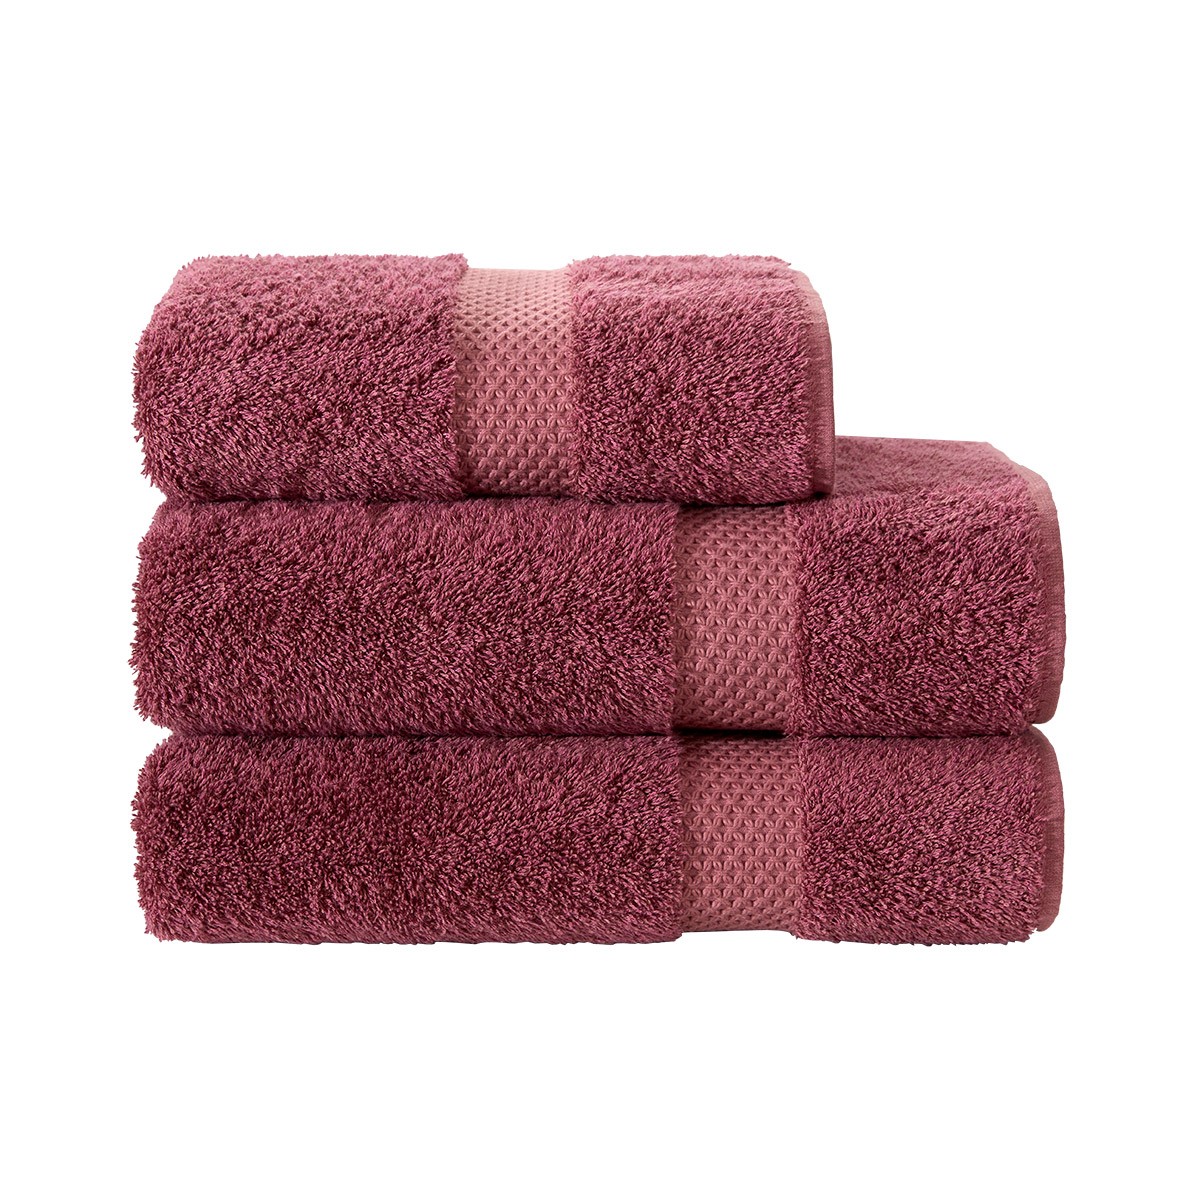 Etoile Towels by Yves Delorme – Everett Stunz